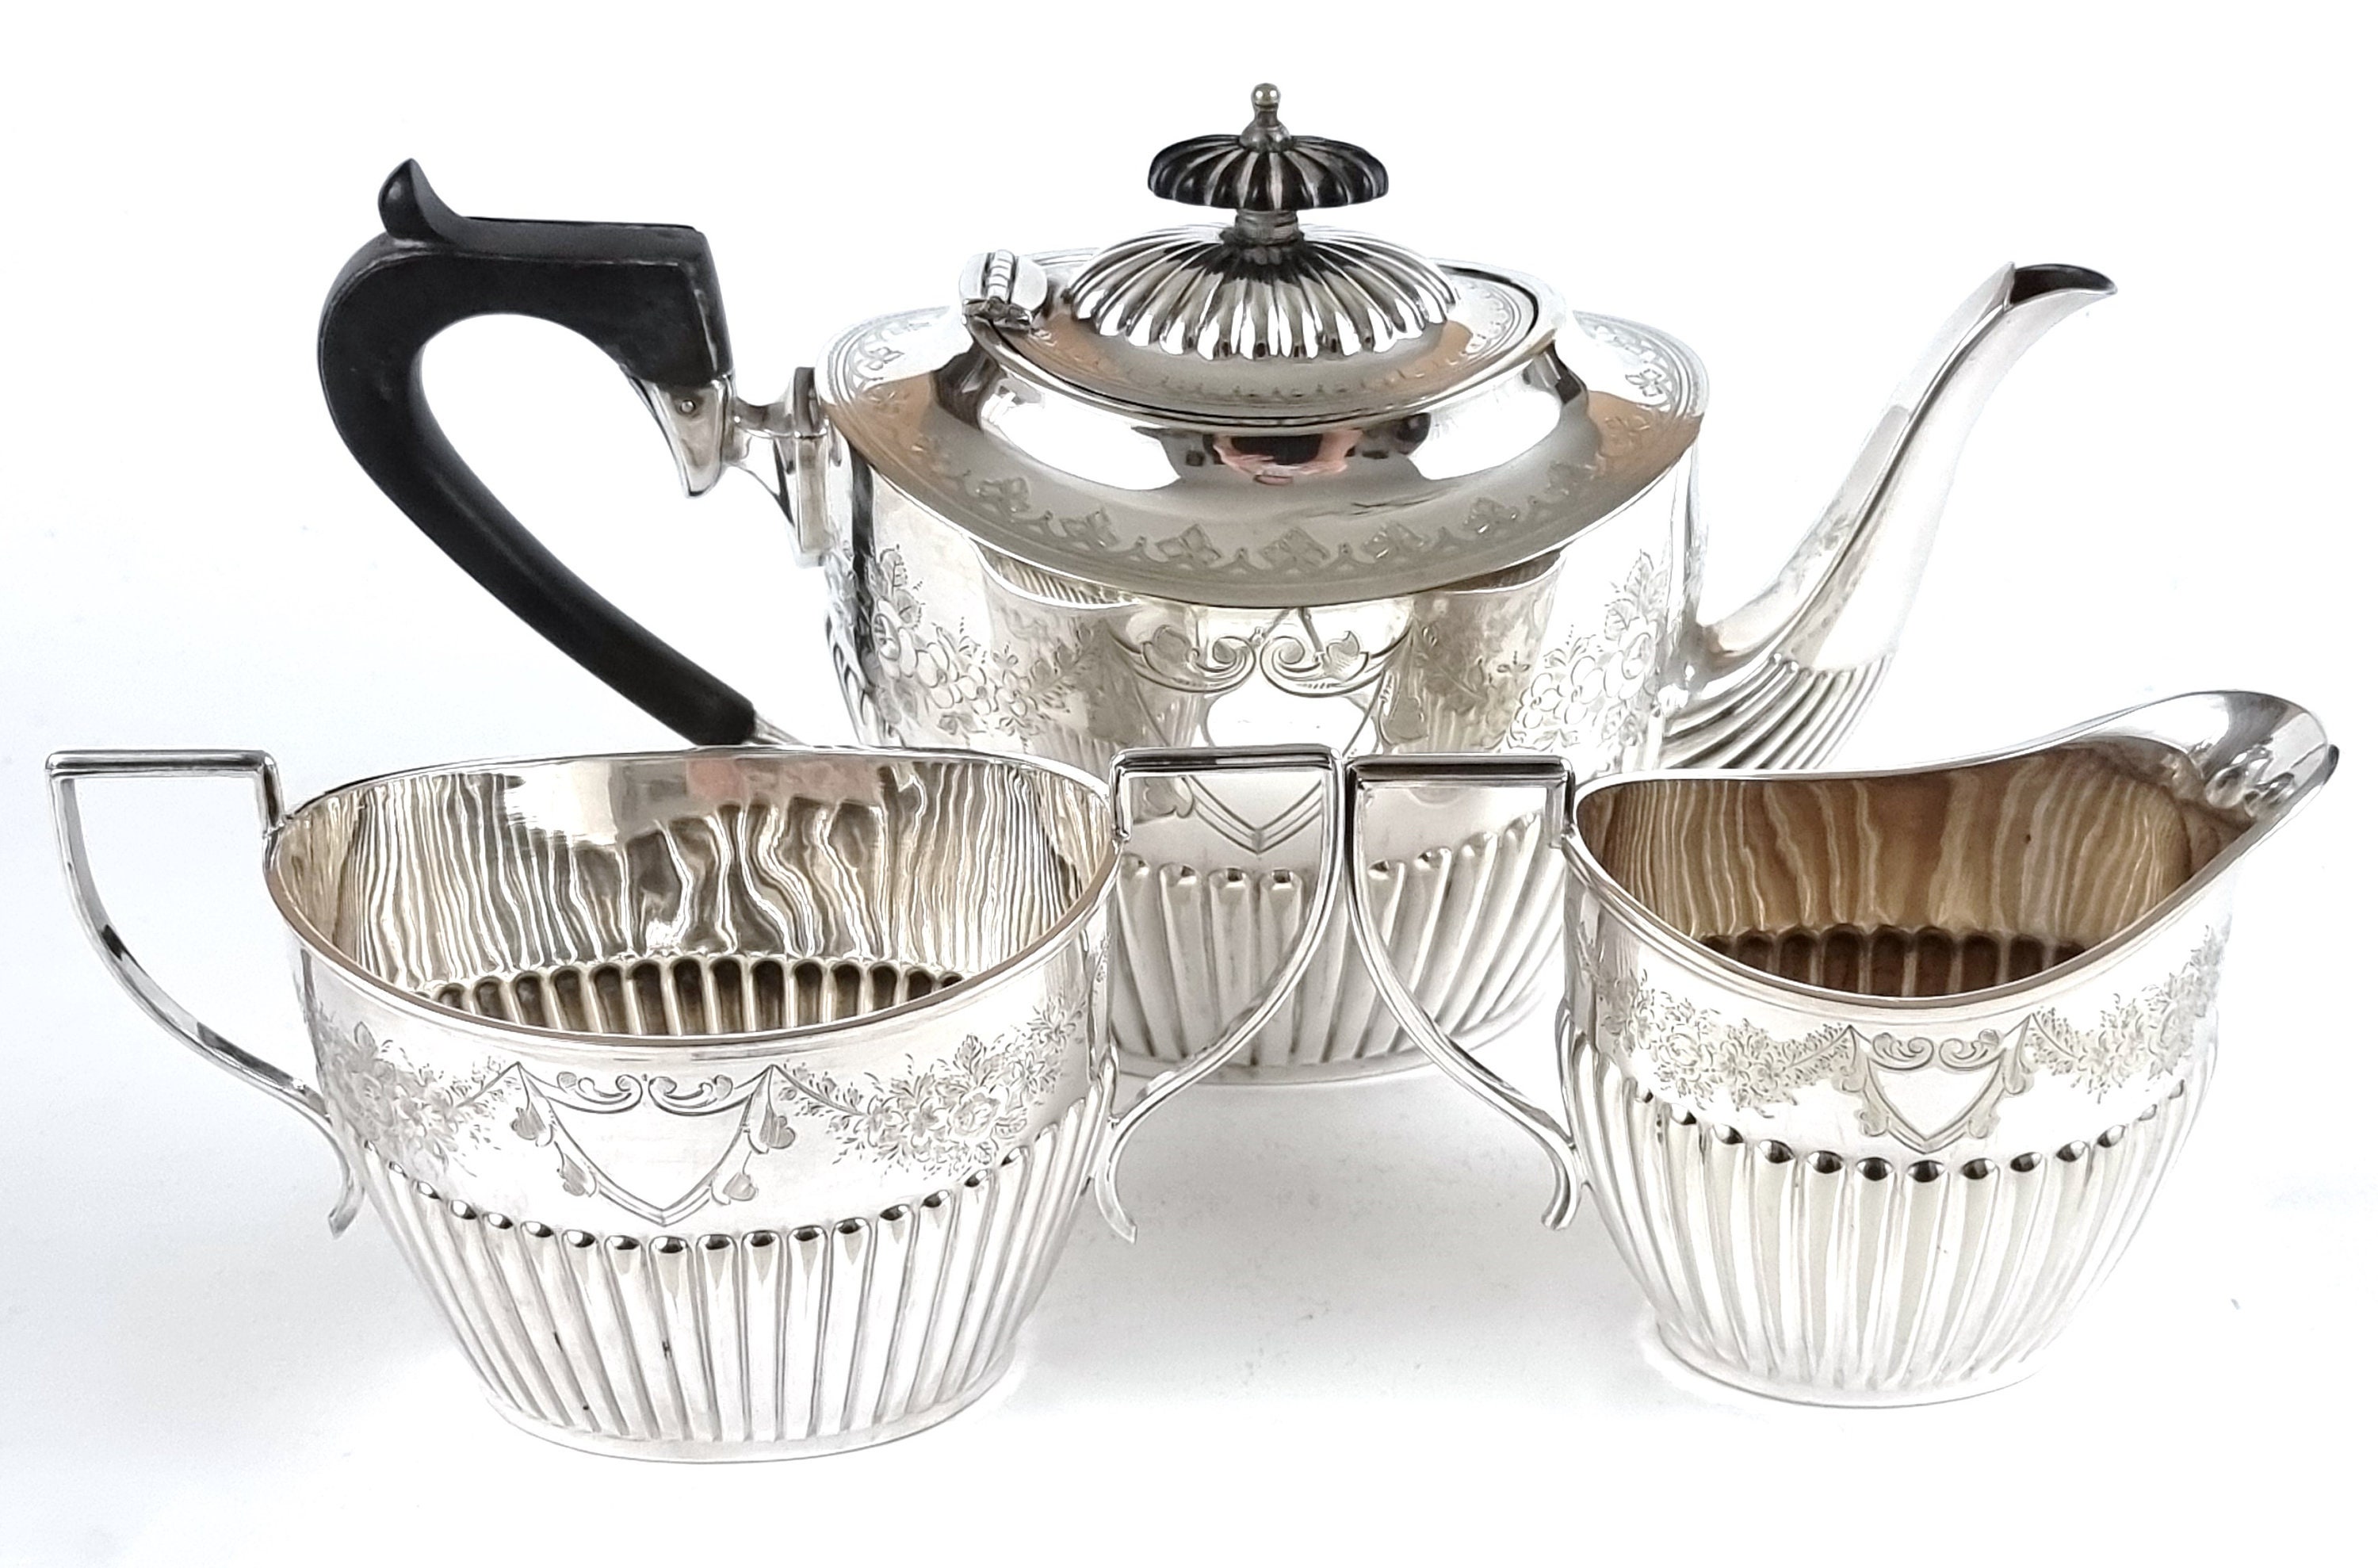 Personal Teapot Ideal For Bed Tray Silver Plated Antique Small - Ruby Lane